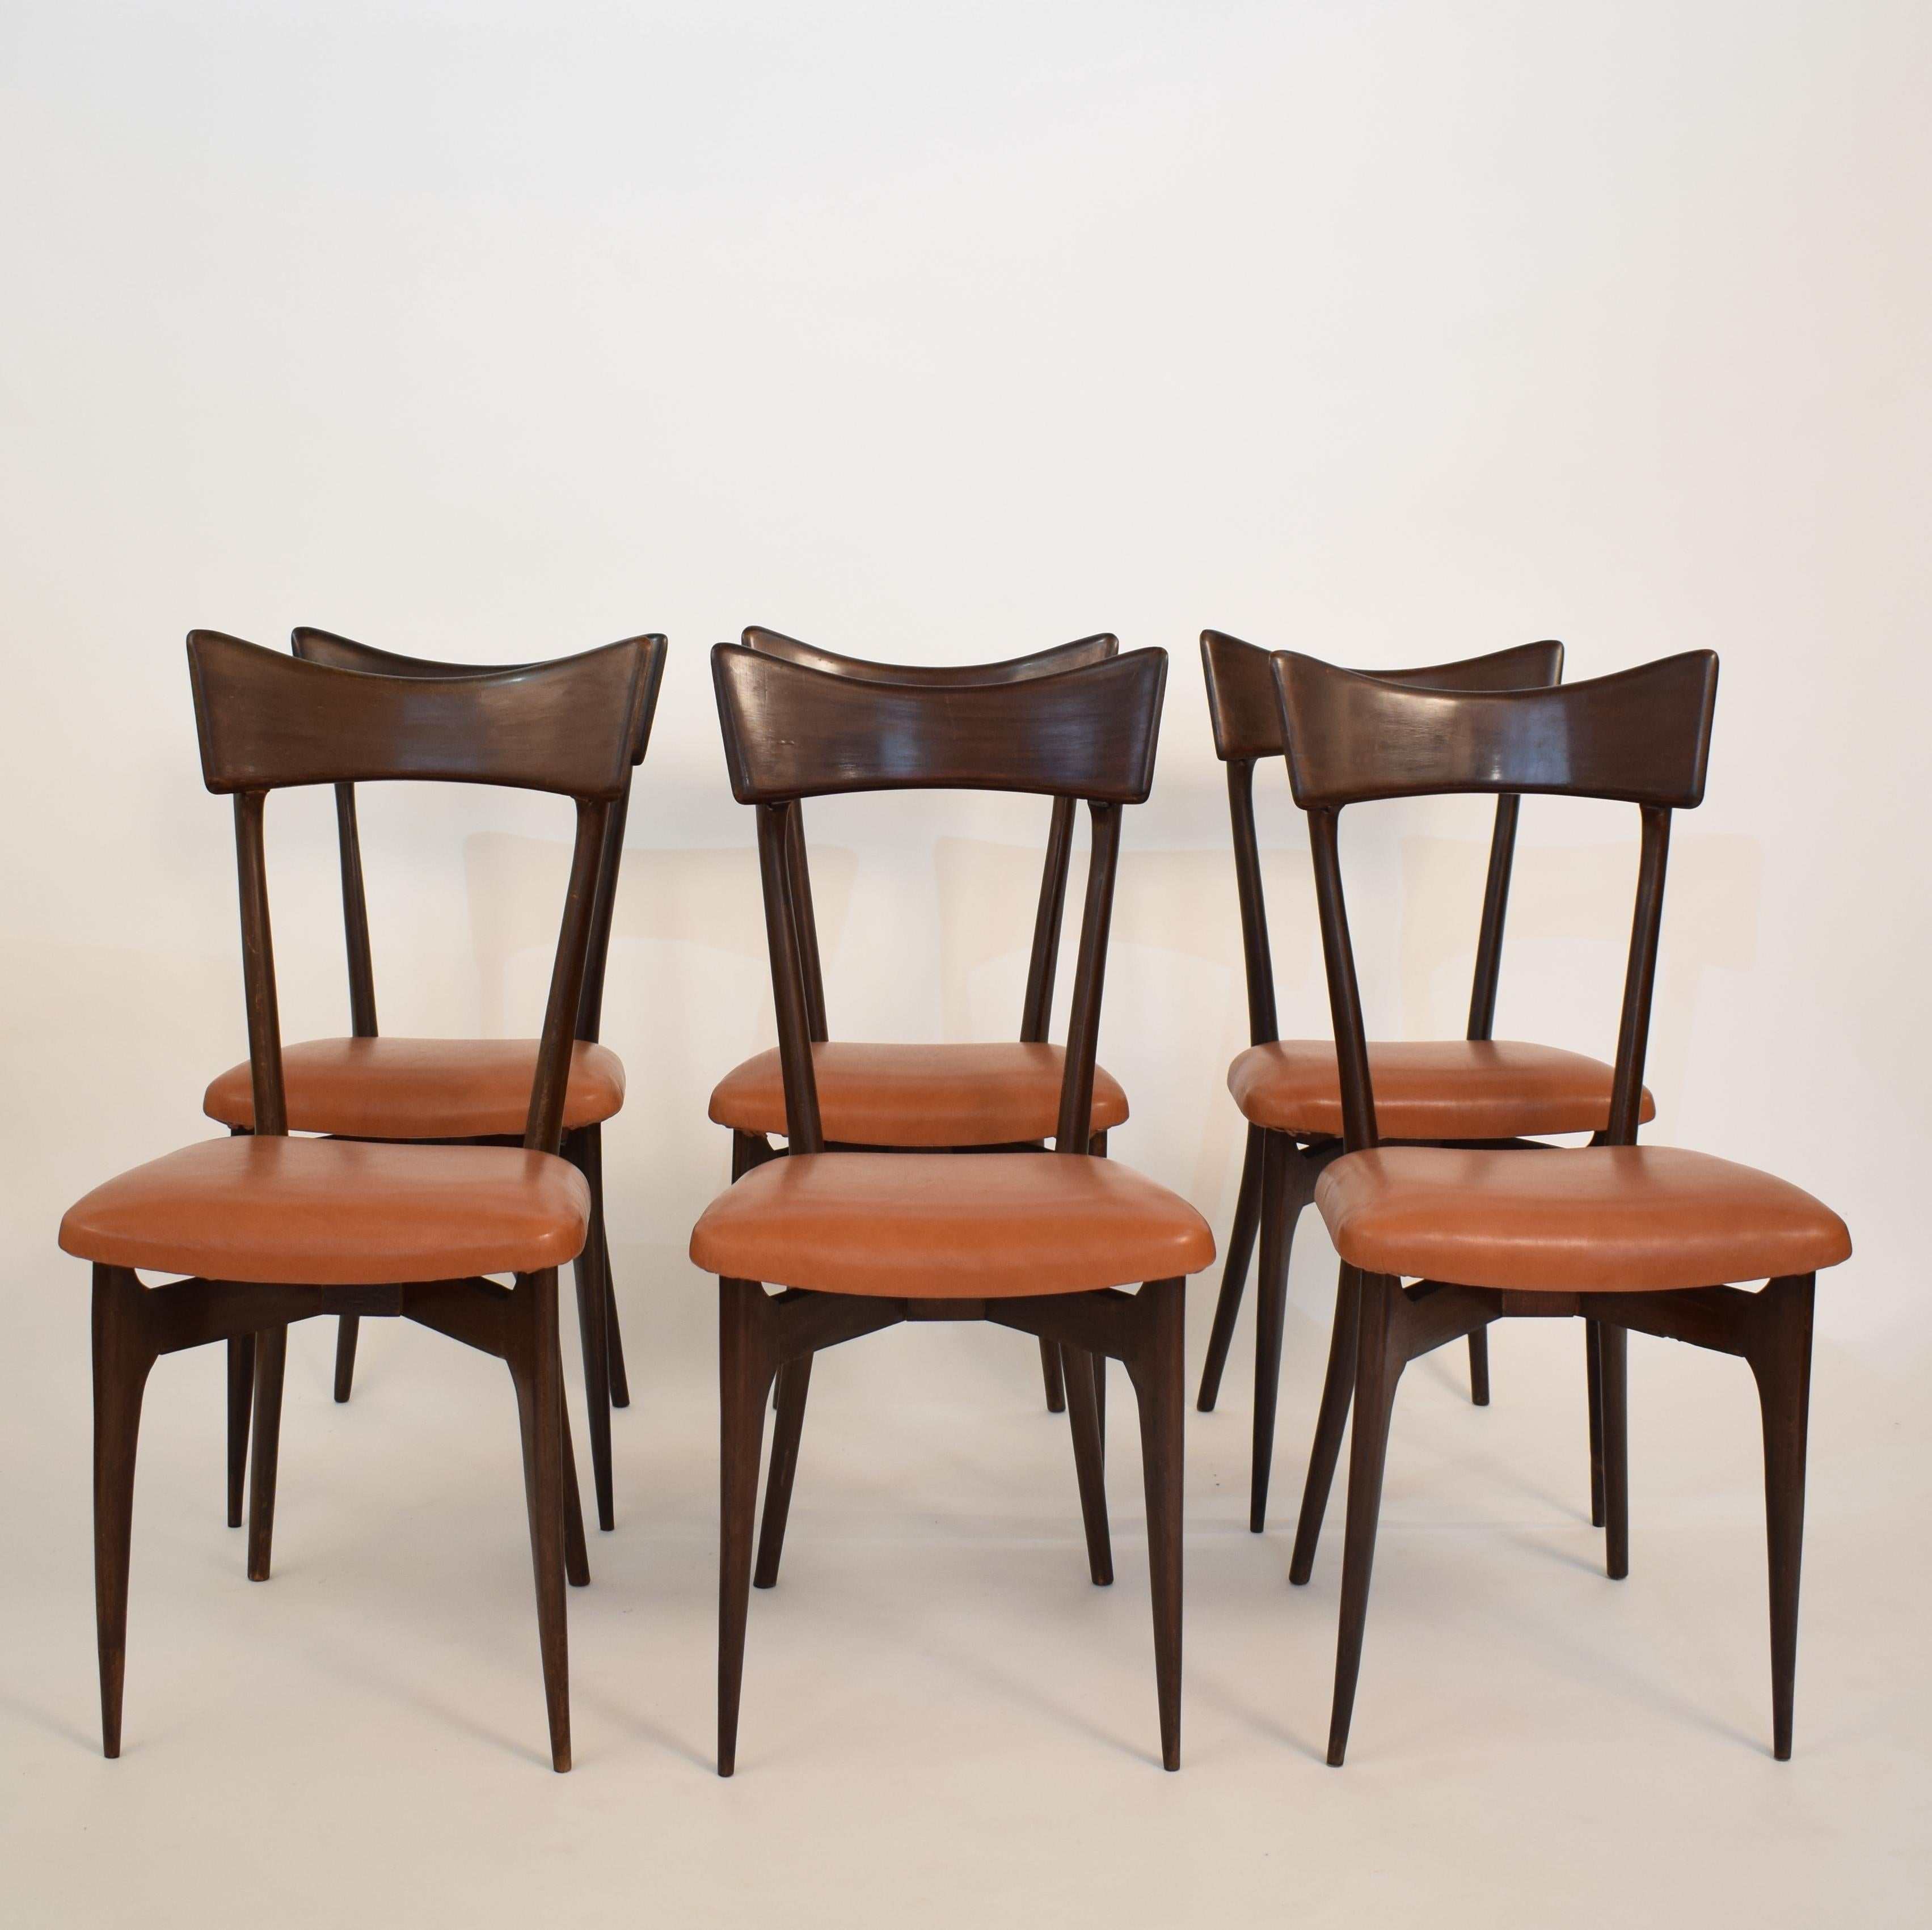 Mid-Century Modern Set of Six Dining Chairs with Cognac Leather by Ico Parisi for Colombo, 1950